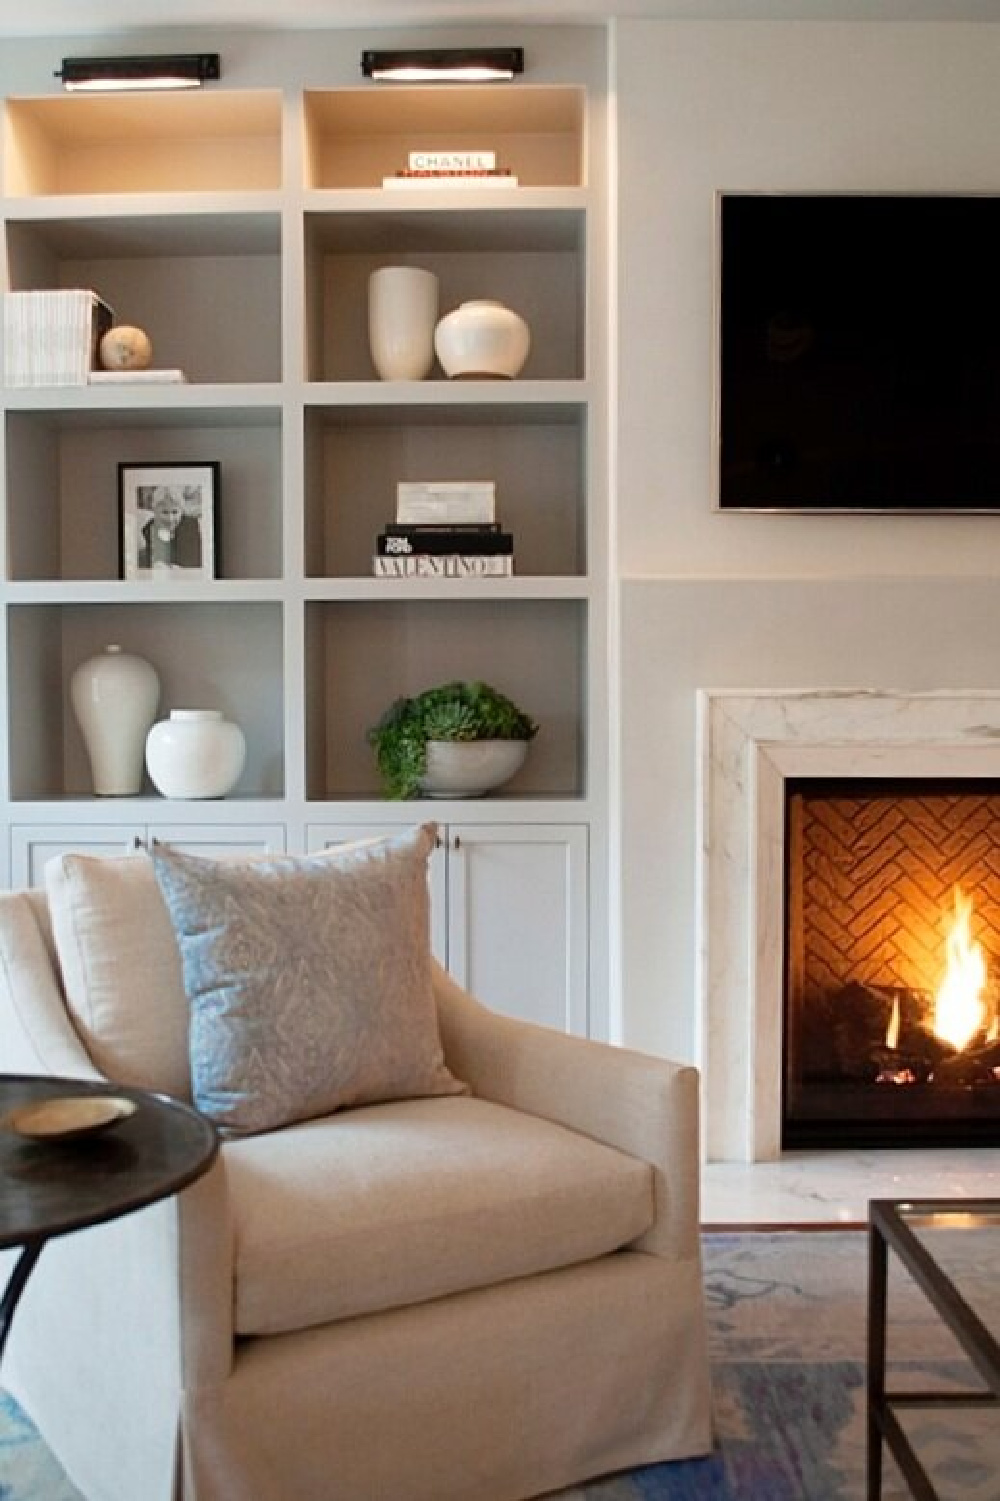 Jil Egan designed interior with built-ins and fireplace. #modernfrench